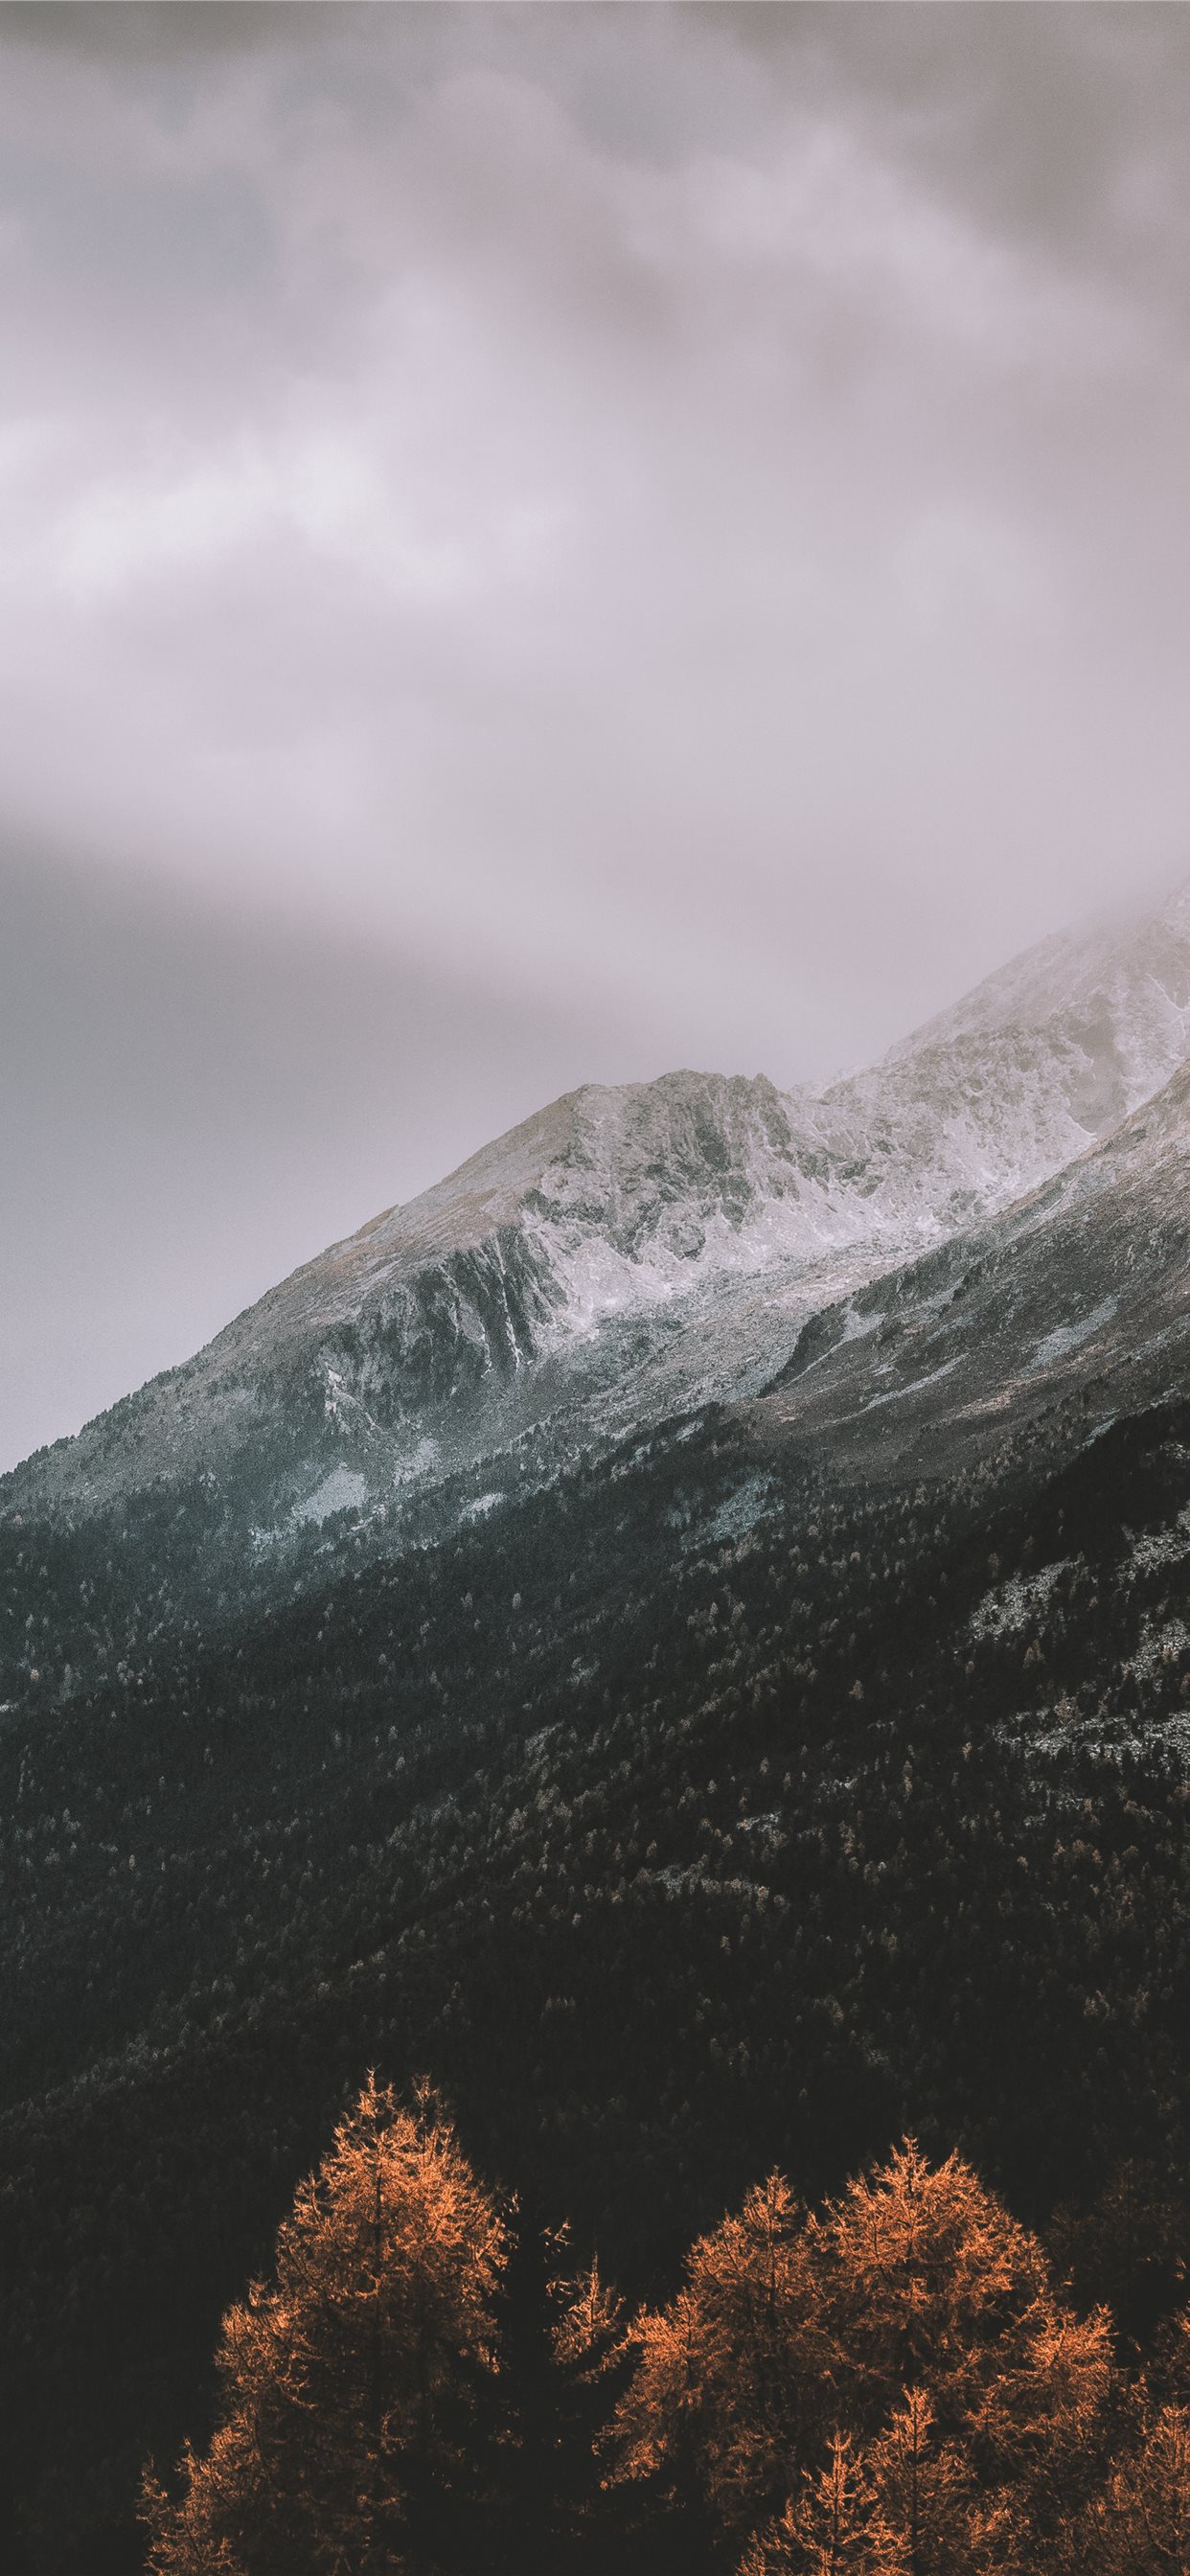 mountain covered by snow during daytime iPhone X Wallpaper Free Download